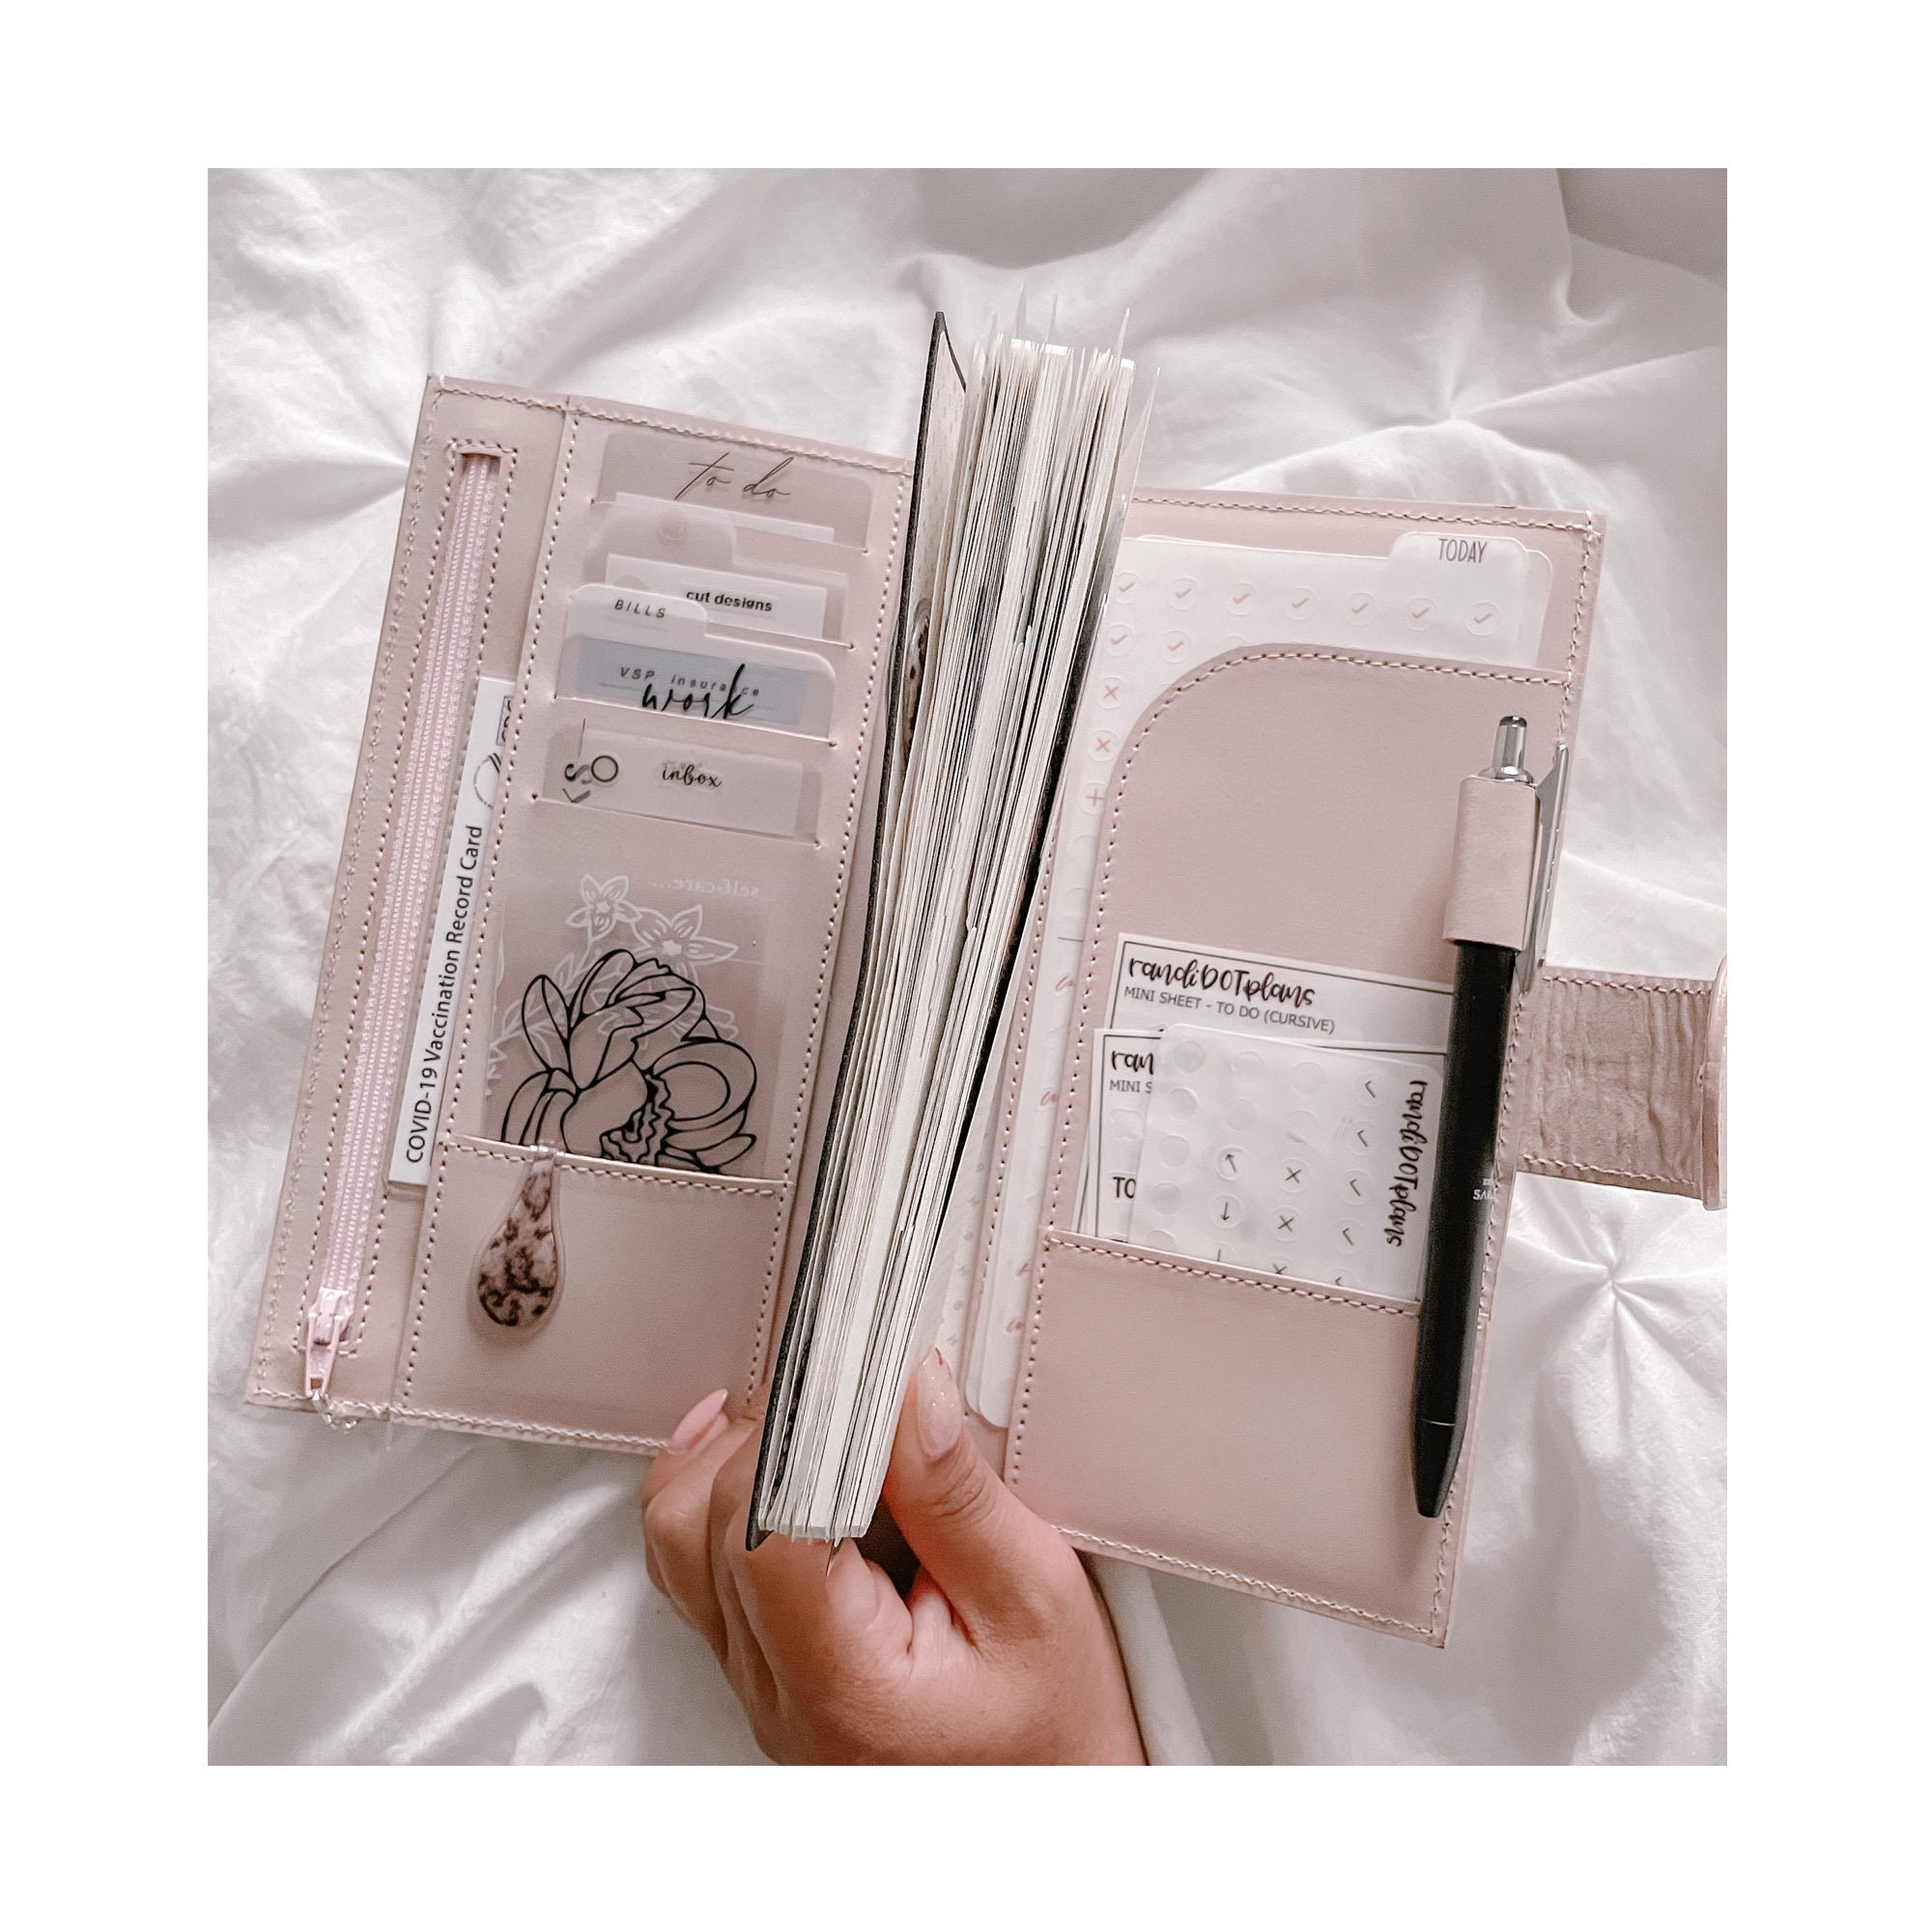 Hobonichi weeks cover Hobonichi weeks mega 2022 cover on cover Day planner  wallets for women with pockets. Hobonichi accessories (AQUAMARINE)